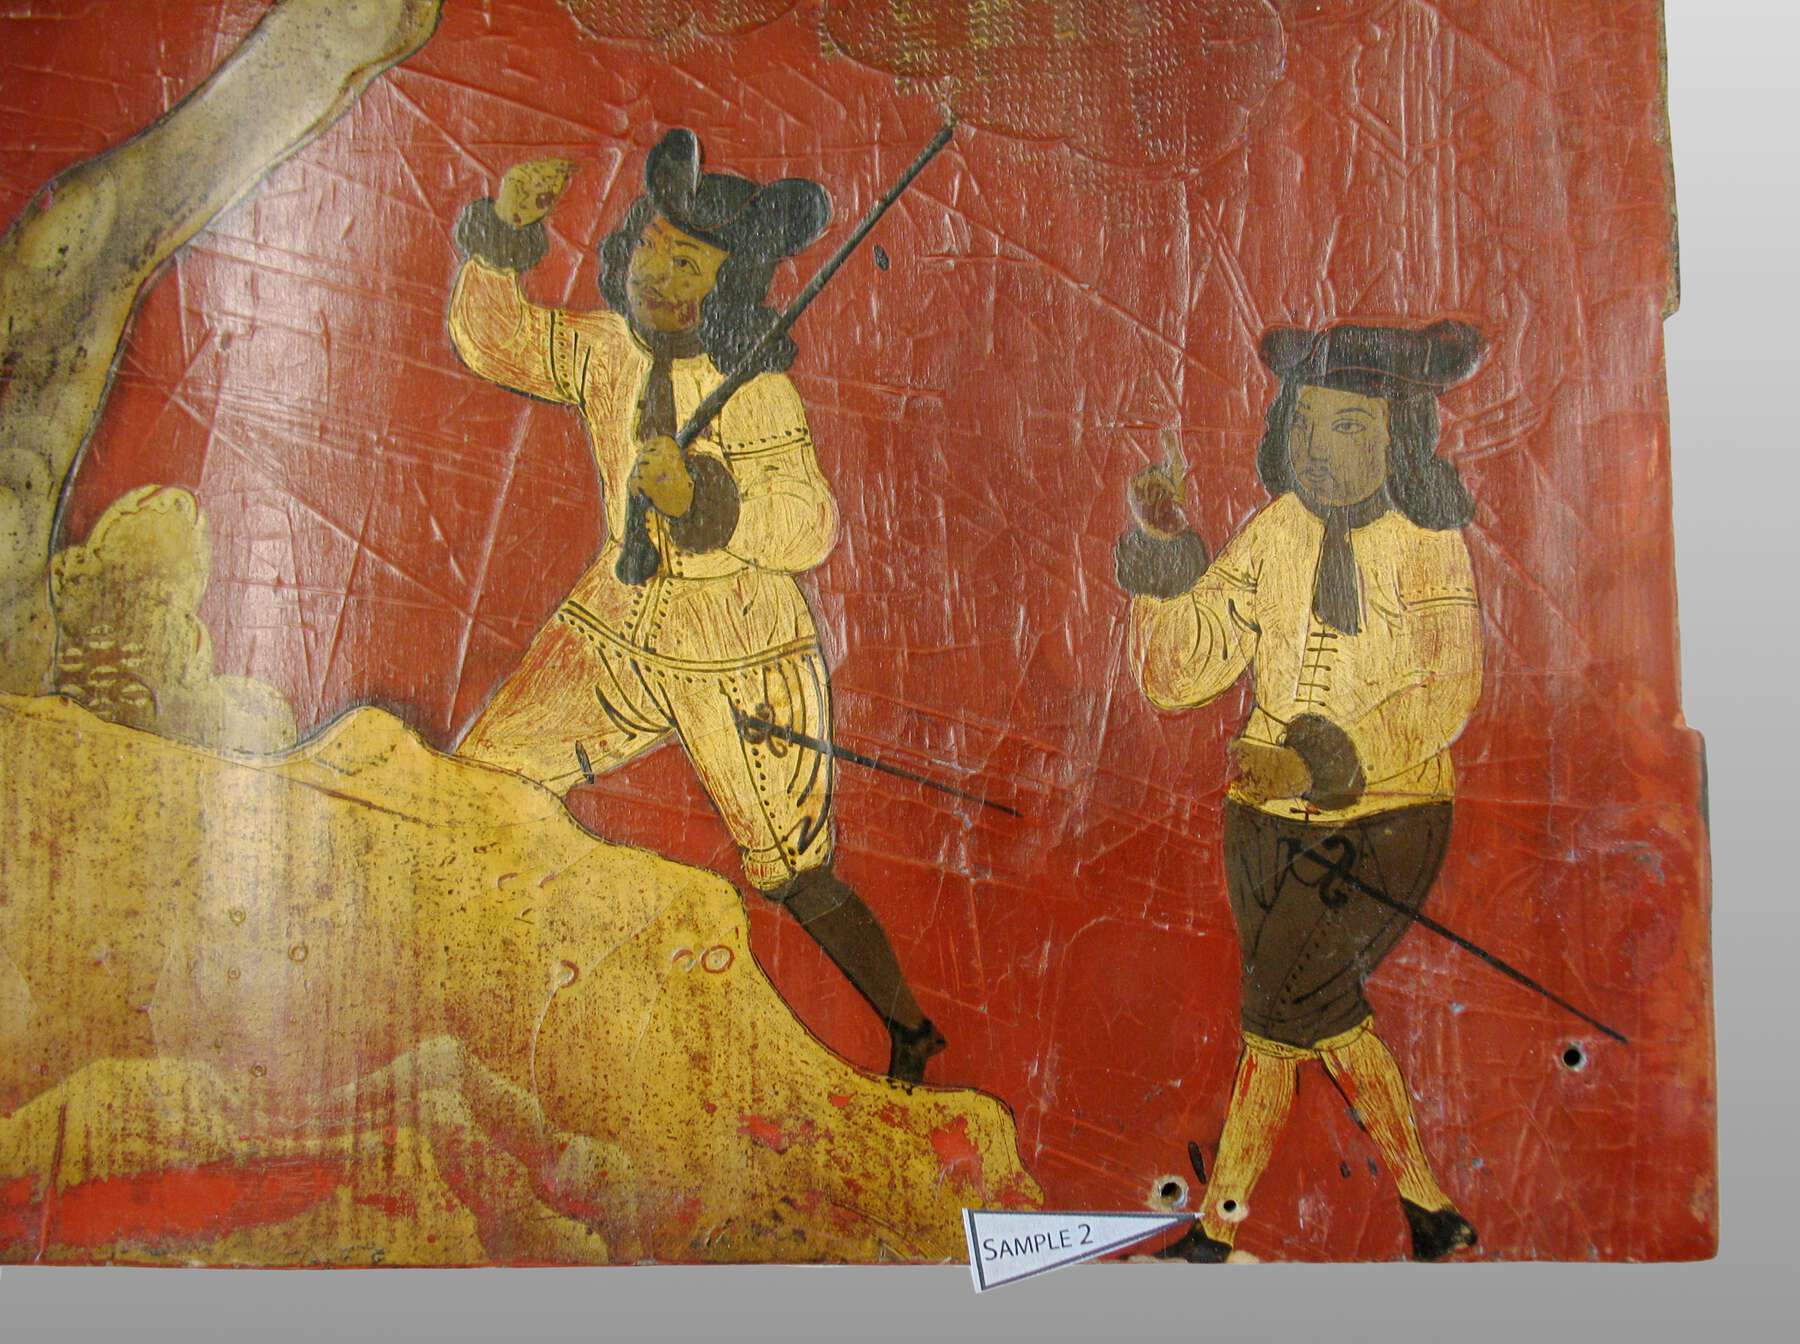 detail of one of the lacquer scenes, with a white triangle with “Sample 2” printed on it pointing to a hole in the ankle of one of the figures